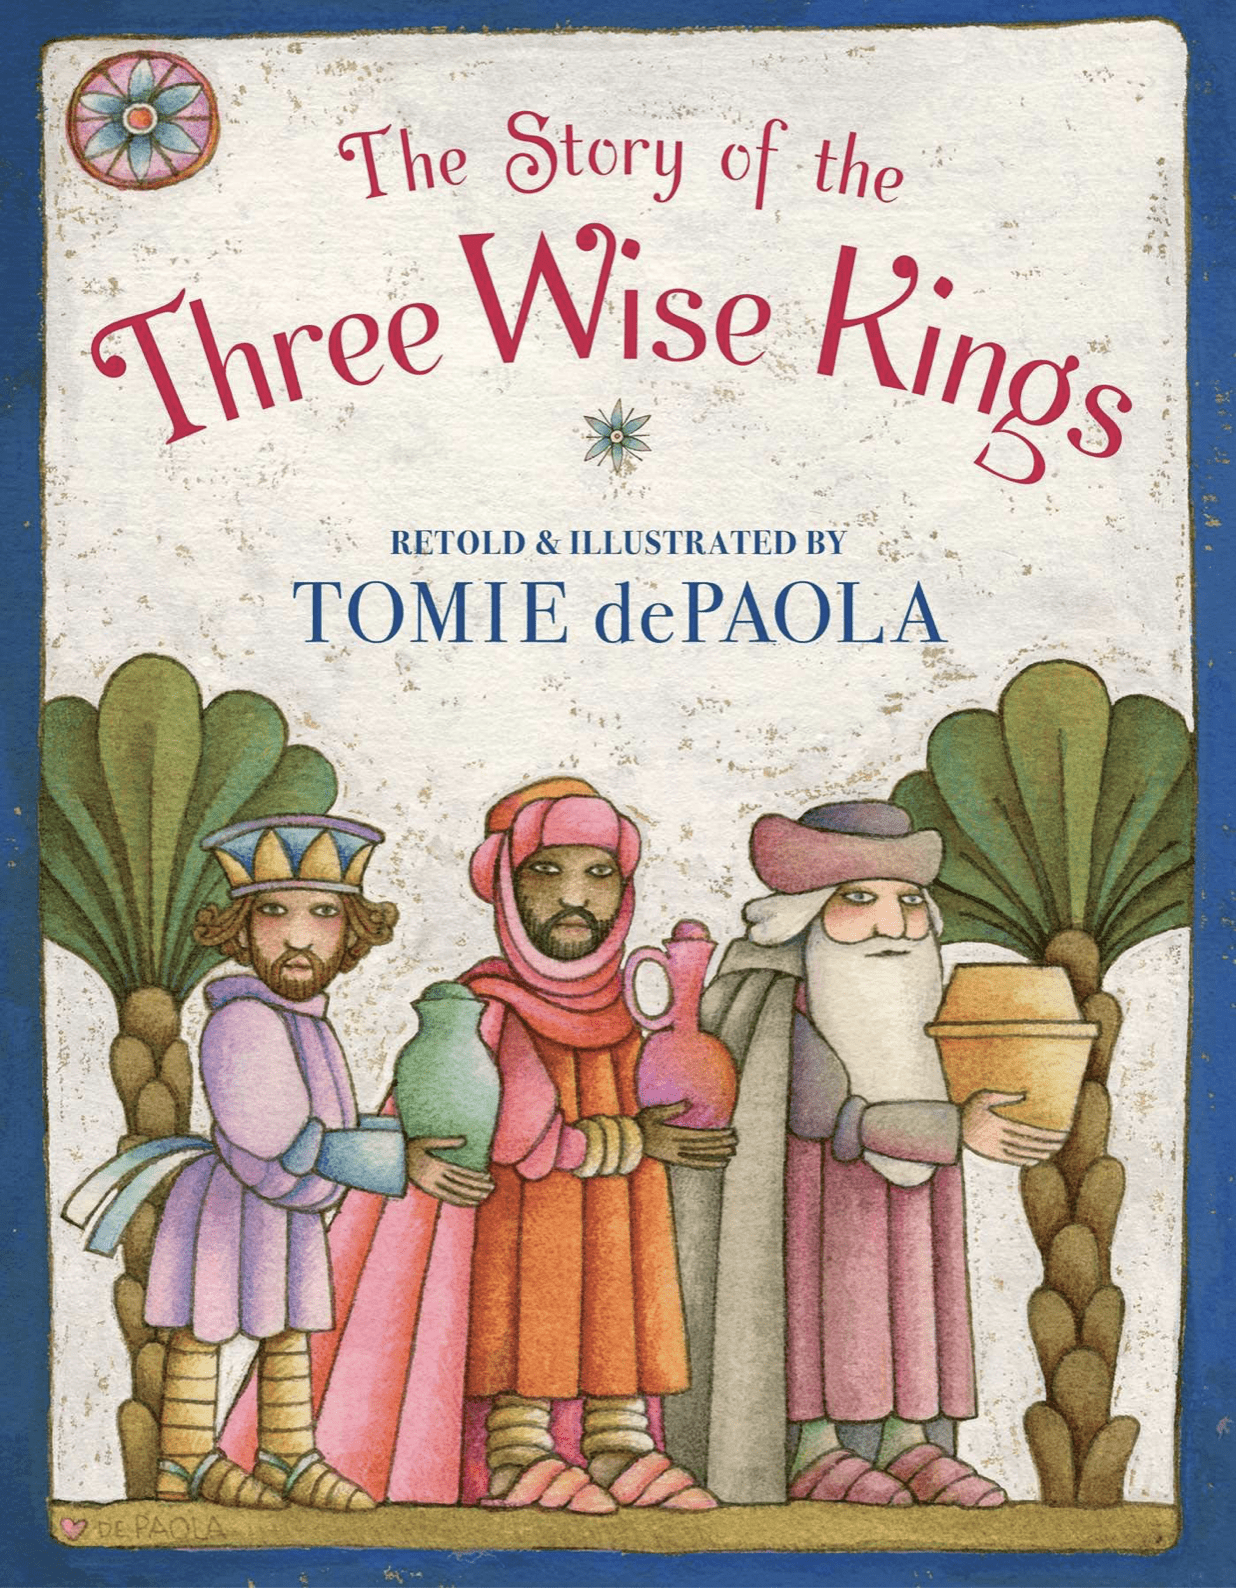 The Story of the Three Wise Kings book for children